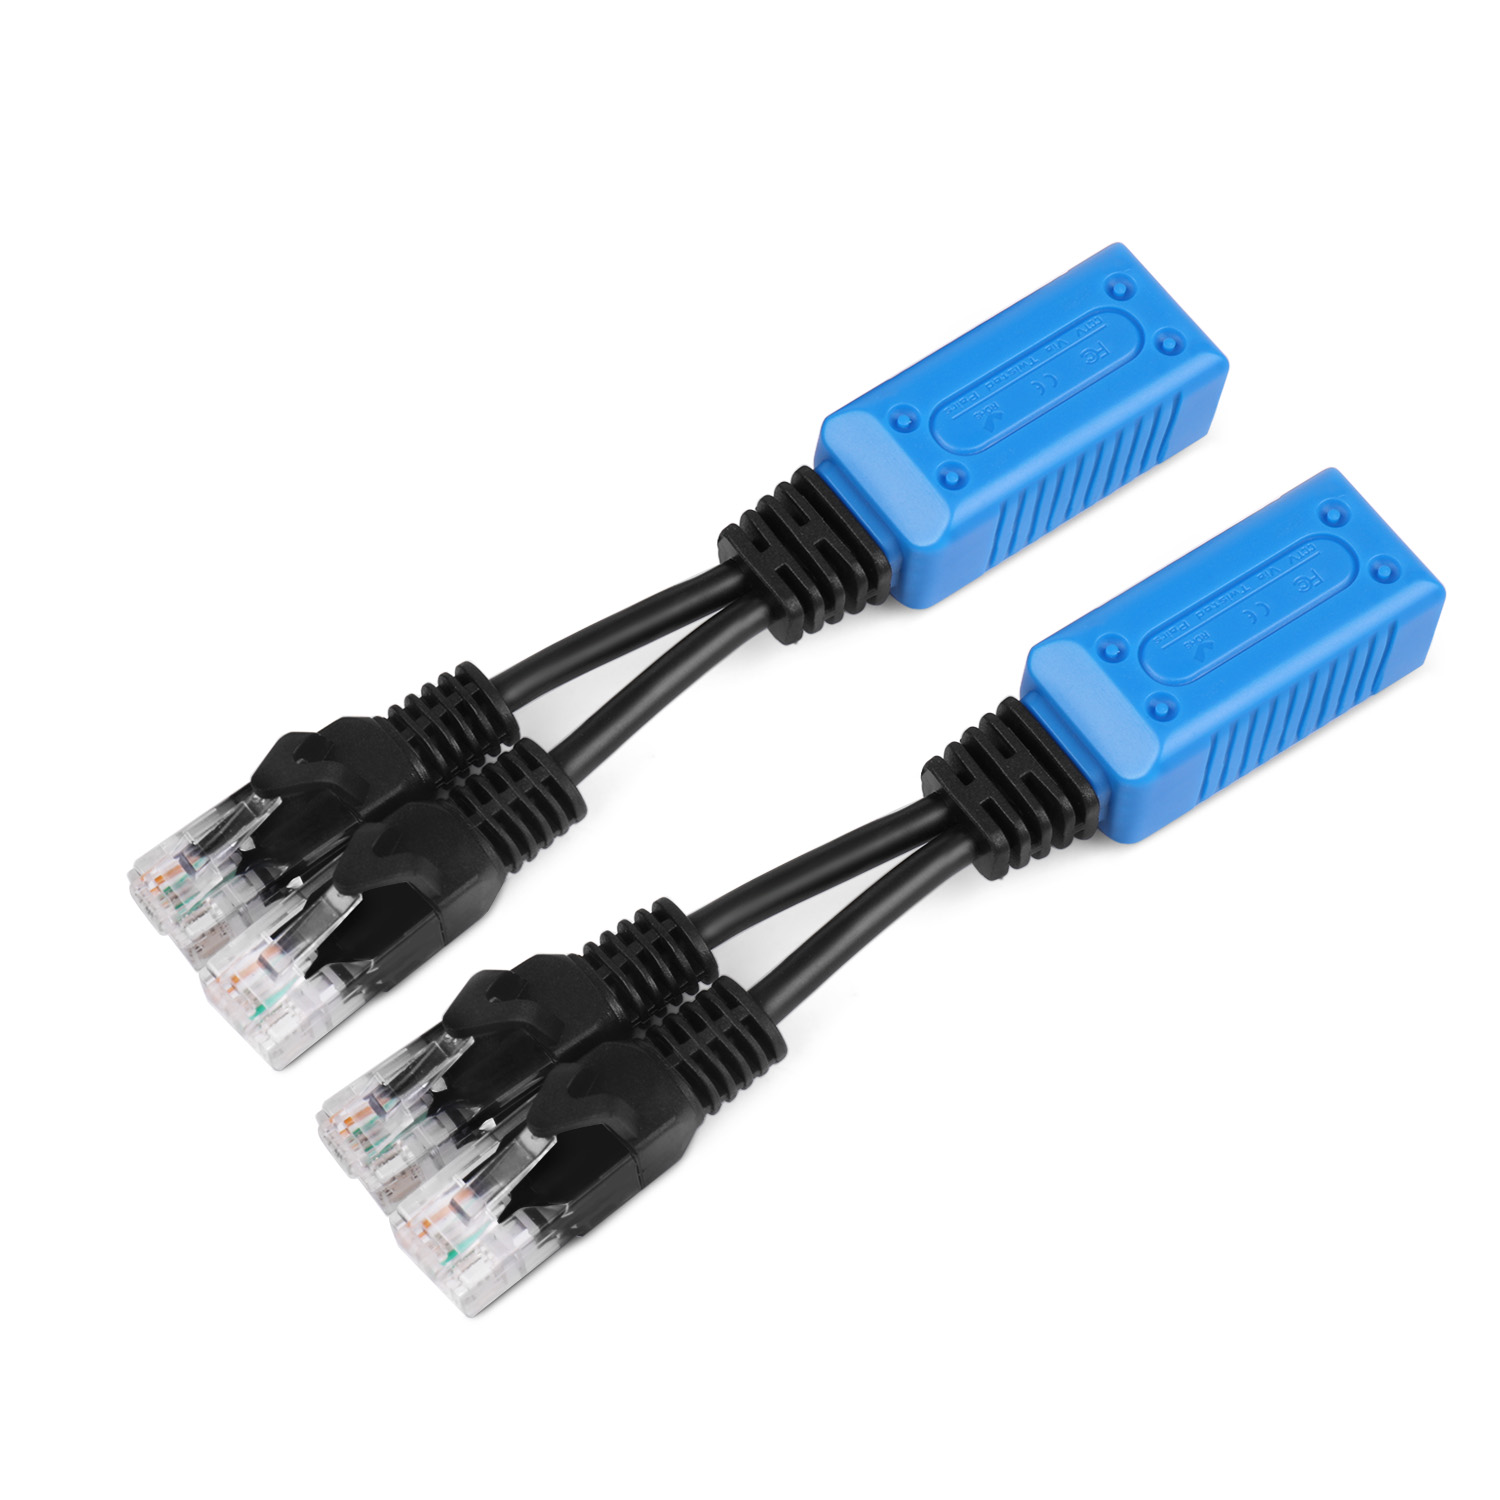 RJ45 Ethernet Cable Combiner / Splitter Kit (1 Pair) - 2 Male to 1 Female POE Data Adapter LAN Ethernet Network Extender Y Splitter Cat5 Cat5e Cat6 UPOE Cable for Surveillance Security Monitoring - image 1 of 7